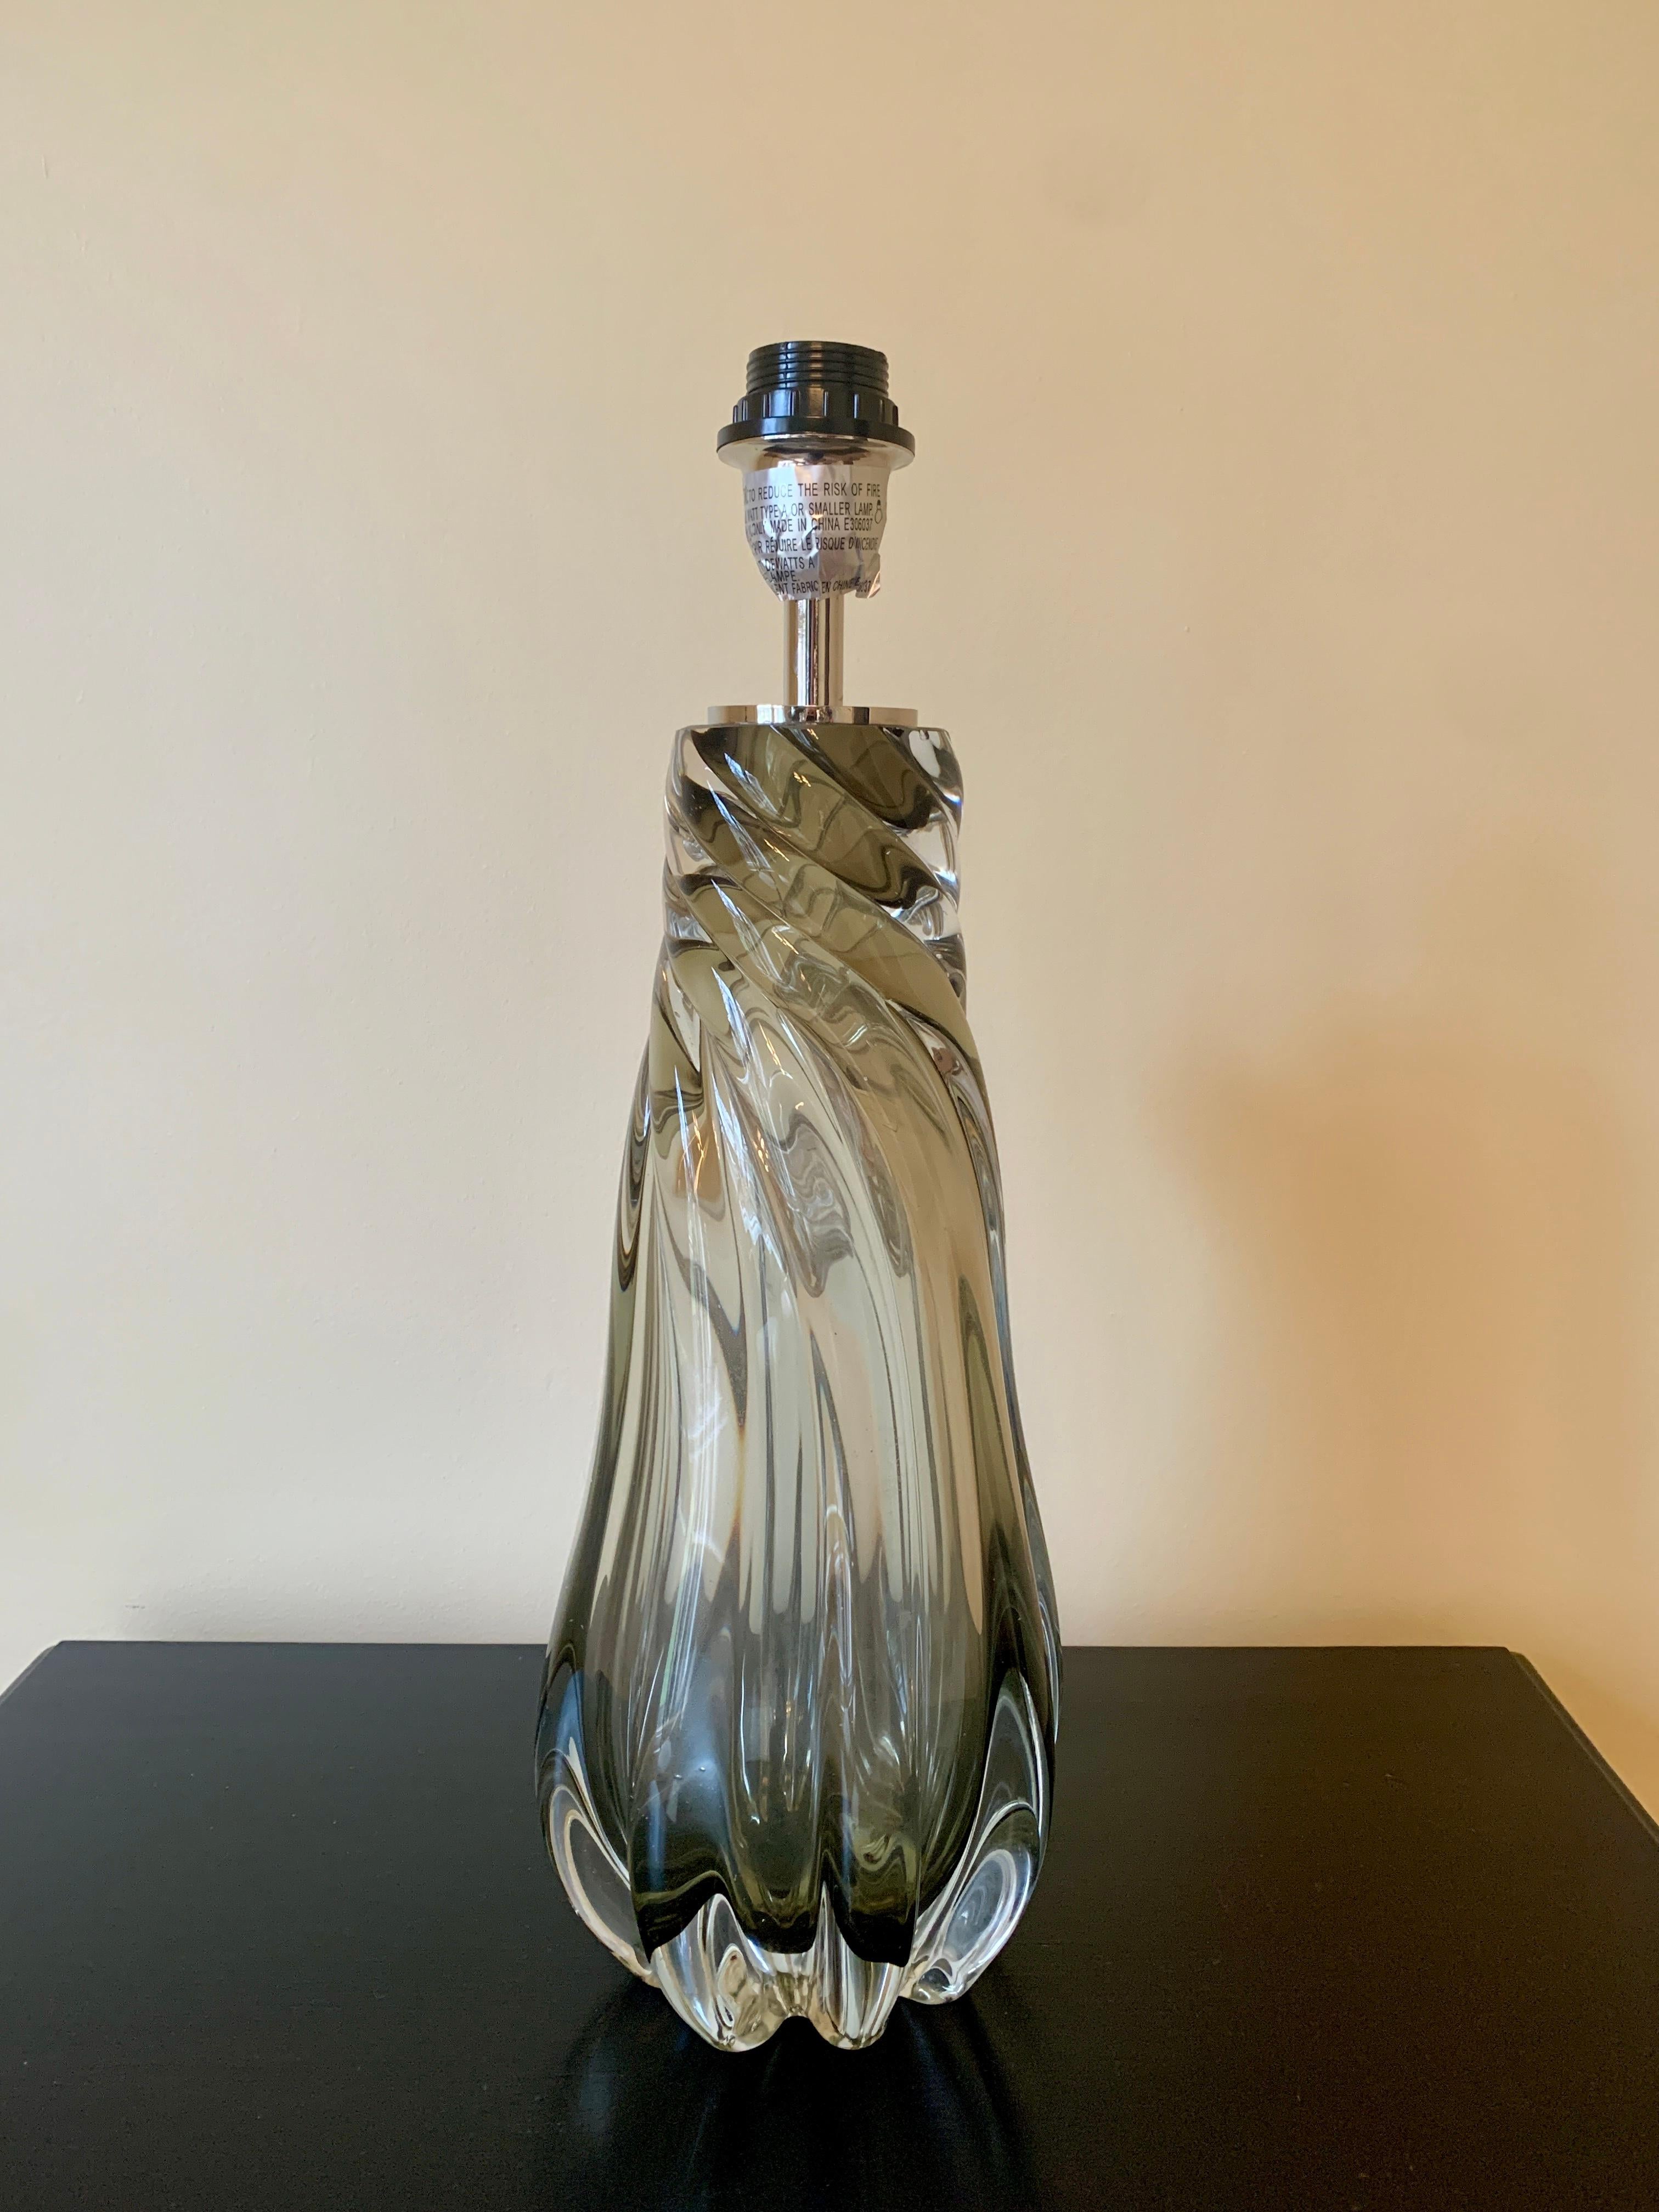 A sleek contemporary Modernist clear glass table lamp with a beautiful twisted base

USA, Late 20th Century

Measures: 6.5